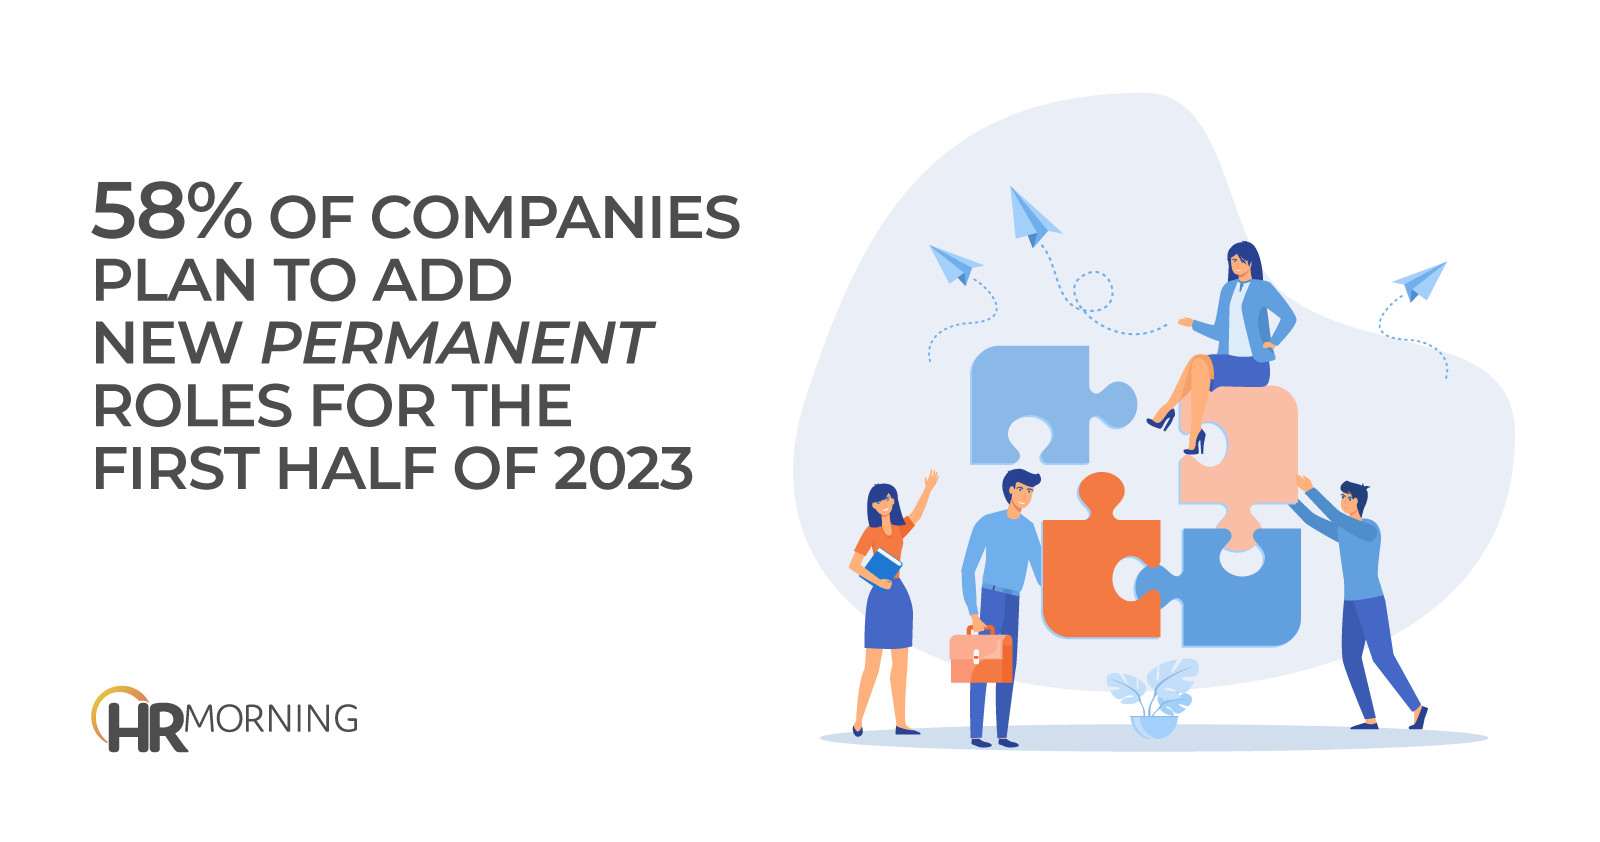 58% of companies plan to add new permanent roles for the first half of 2023